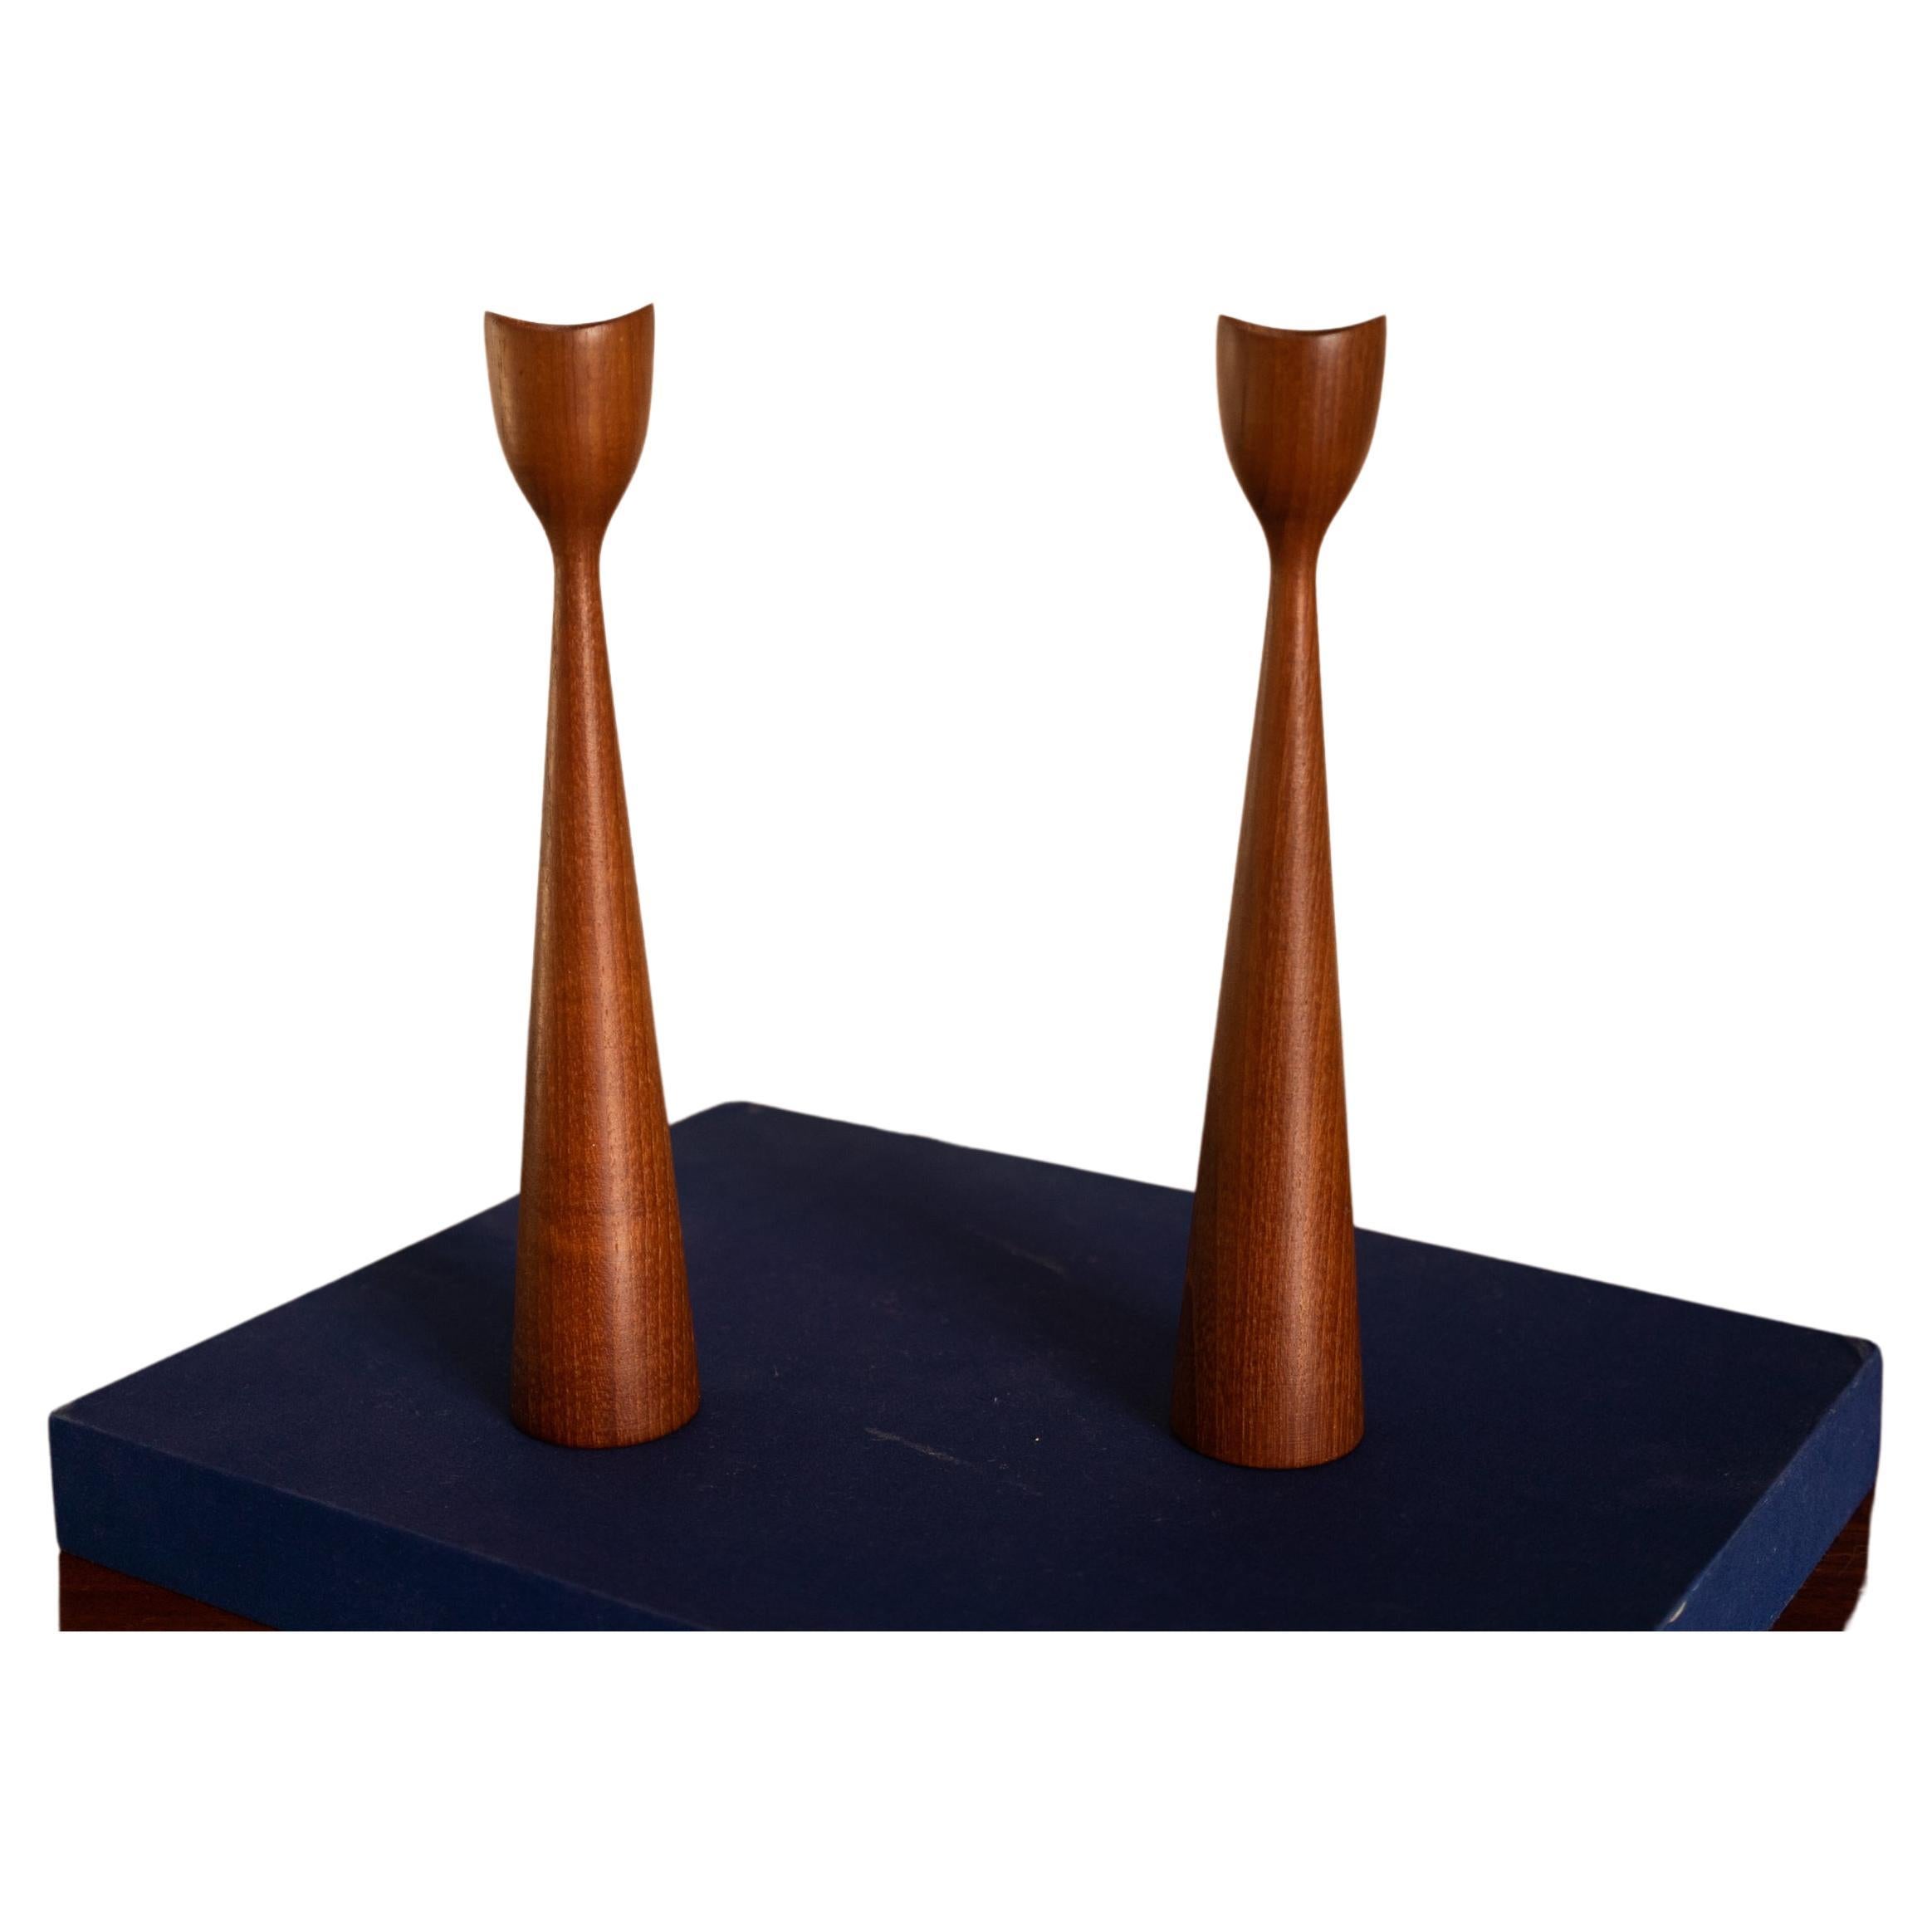 Pair of midcentury Danish teak candlesticks - featuring an elegant modern design in a medium brown finish. Denmark, 1960s.

Excellent vintage condition - minor scuffs - no loss - no damage - no restoration - signs of age and use.

I'm selling a bit